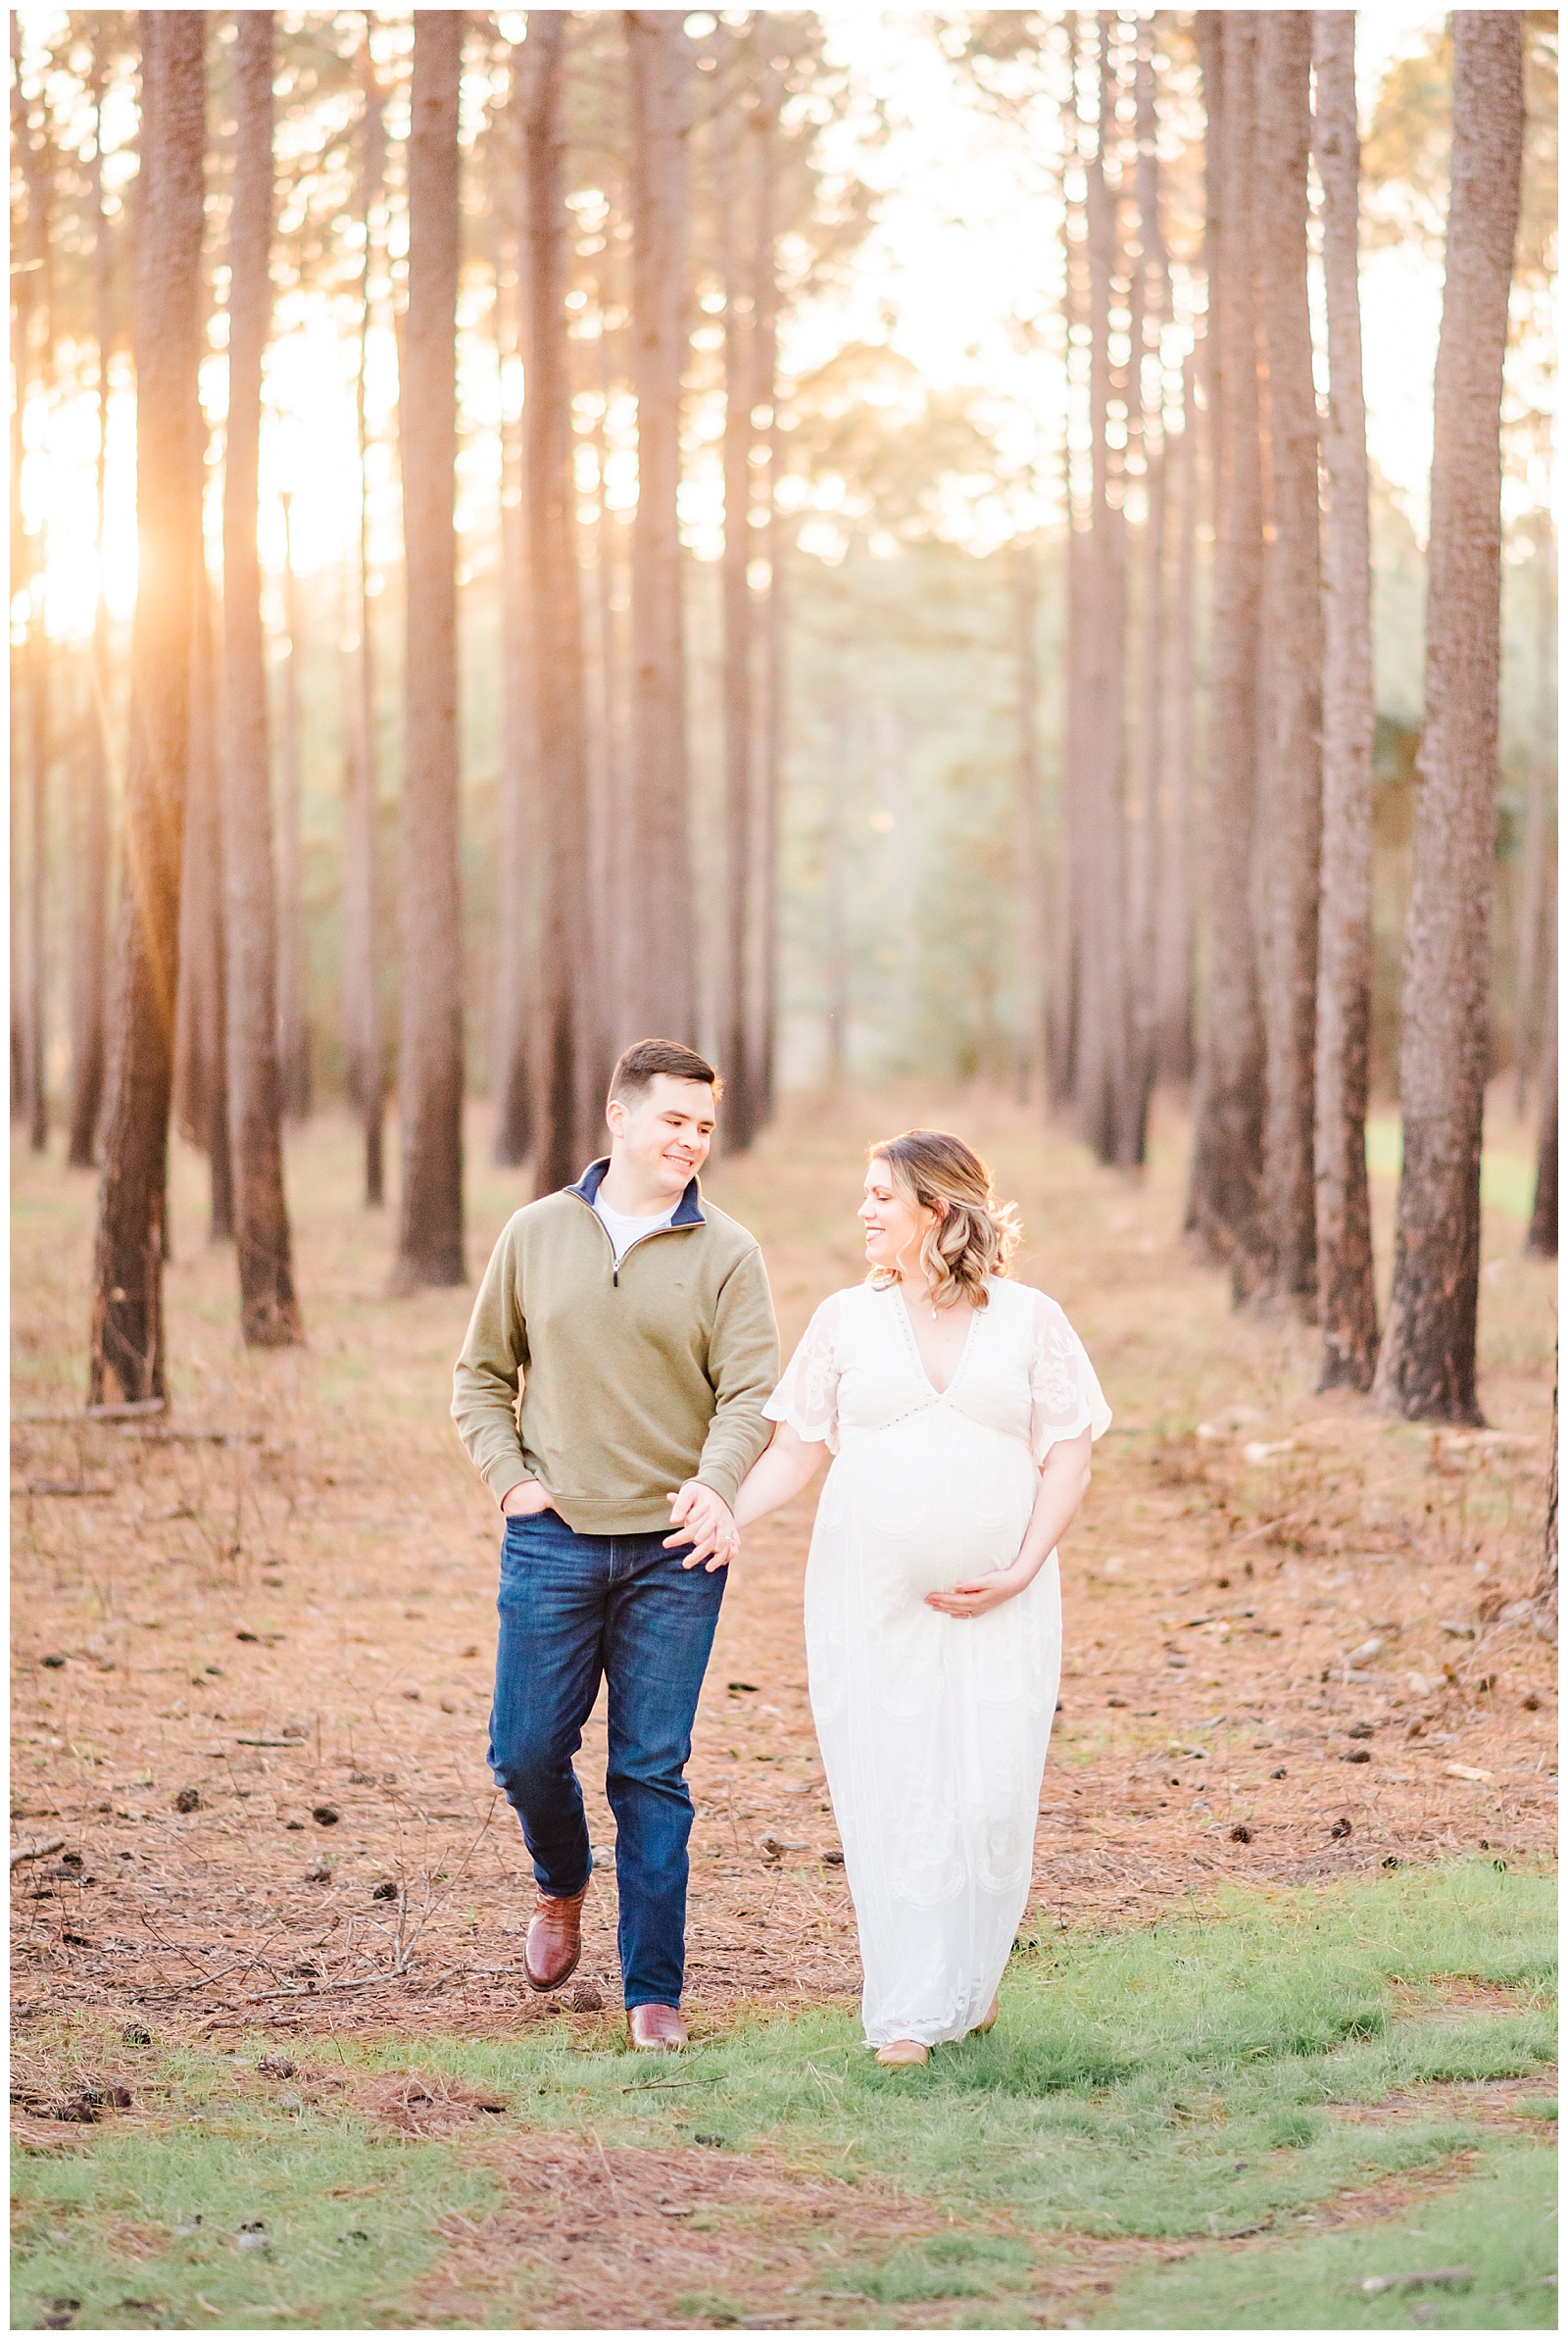 Maternity Photography in The Woodlands Texas by Relics of Rainbows Photo